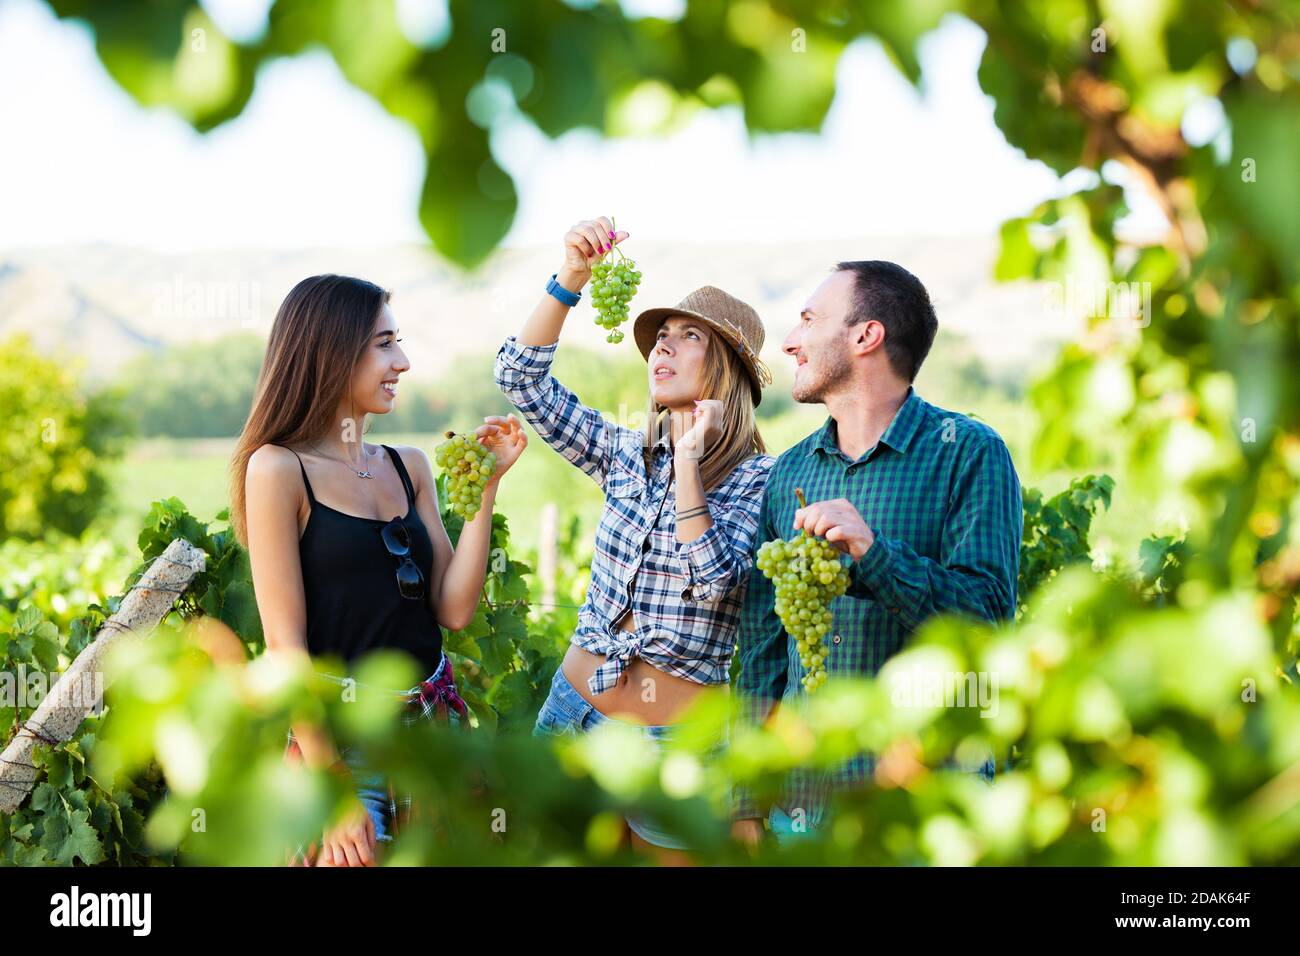 Tree friends tasting grapes. Two girls and a man during harvest season a t vineyard field. Stock Photo